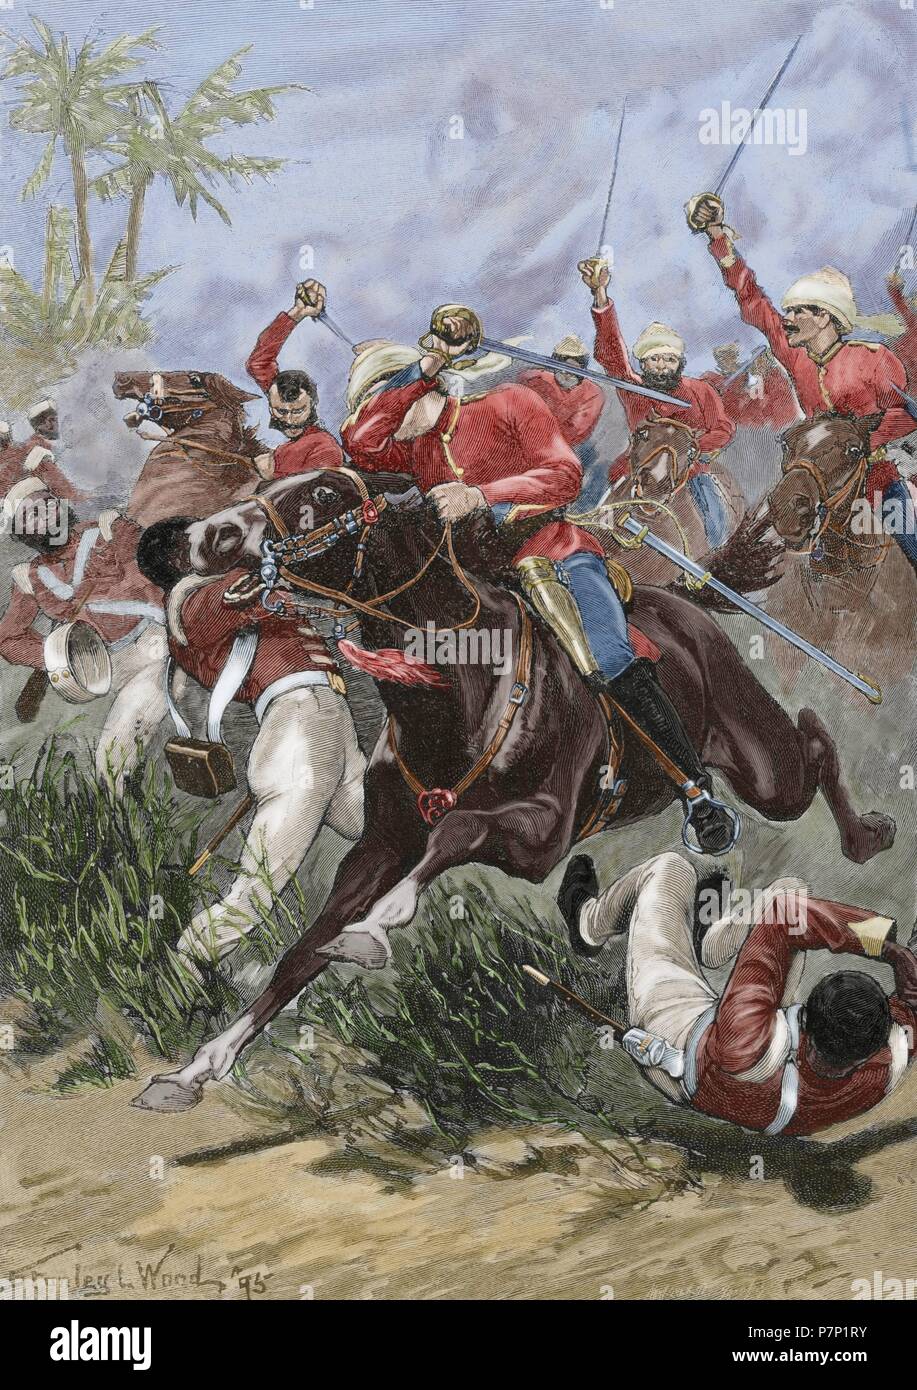 India. Sepoy Rebellion (1857). India revolution that erupted as a reaction against British colonial policy. In 1857 the sepoys revolted and deprived of all authority to the East India Company (1858). Charging the British Cavalry in Lucknow, 1857. Drawing by Stanley L. Wood. Ilustracio n Ibe rica, 1898. Colored. Stock Photo